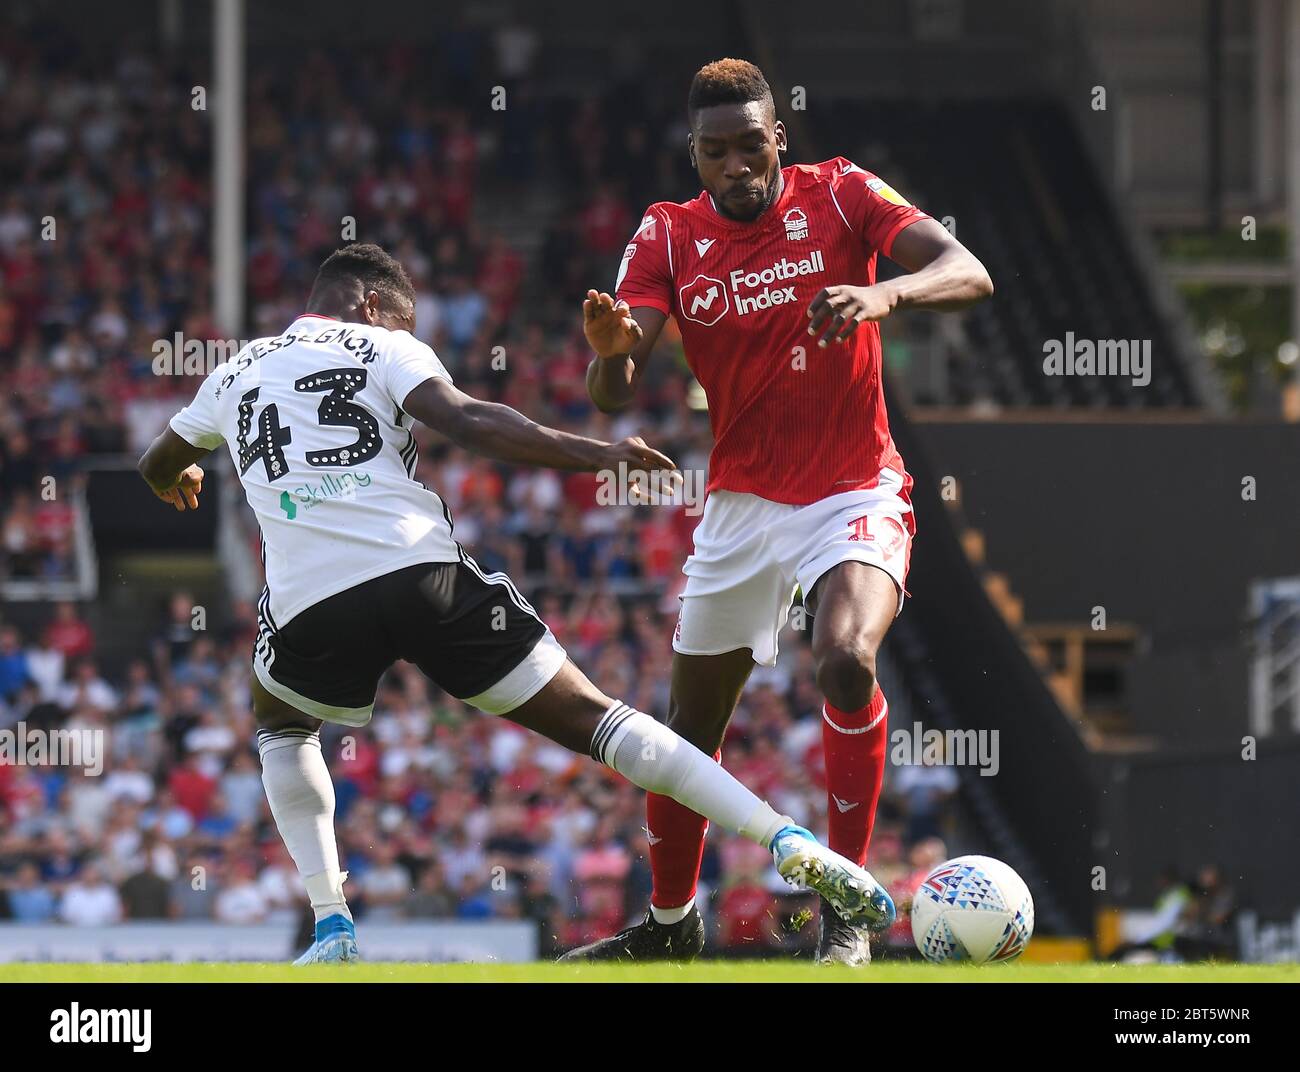 LONDON, ENGLAND - AUGUST 24, 2019: Sammy Ameobi of Forest pictured during the 2019/20 EFL SkyBet Championship game between Fulham FC and Nottingham Forest FC at Craven Cottage. Stock Photo